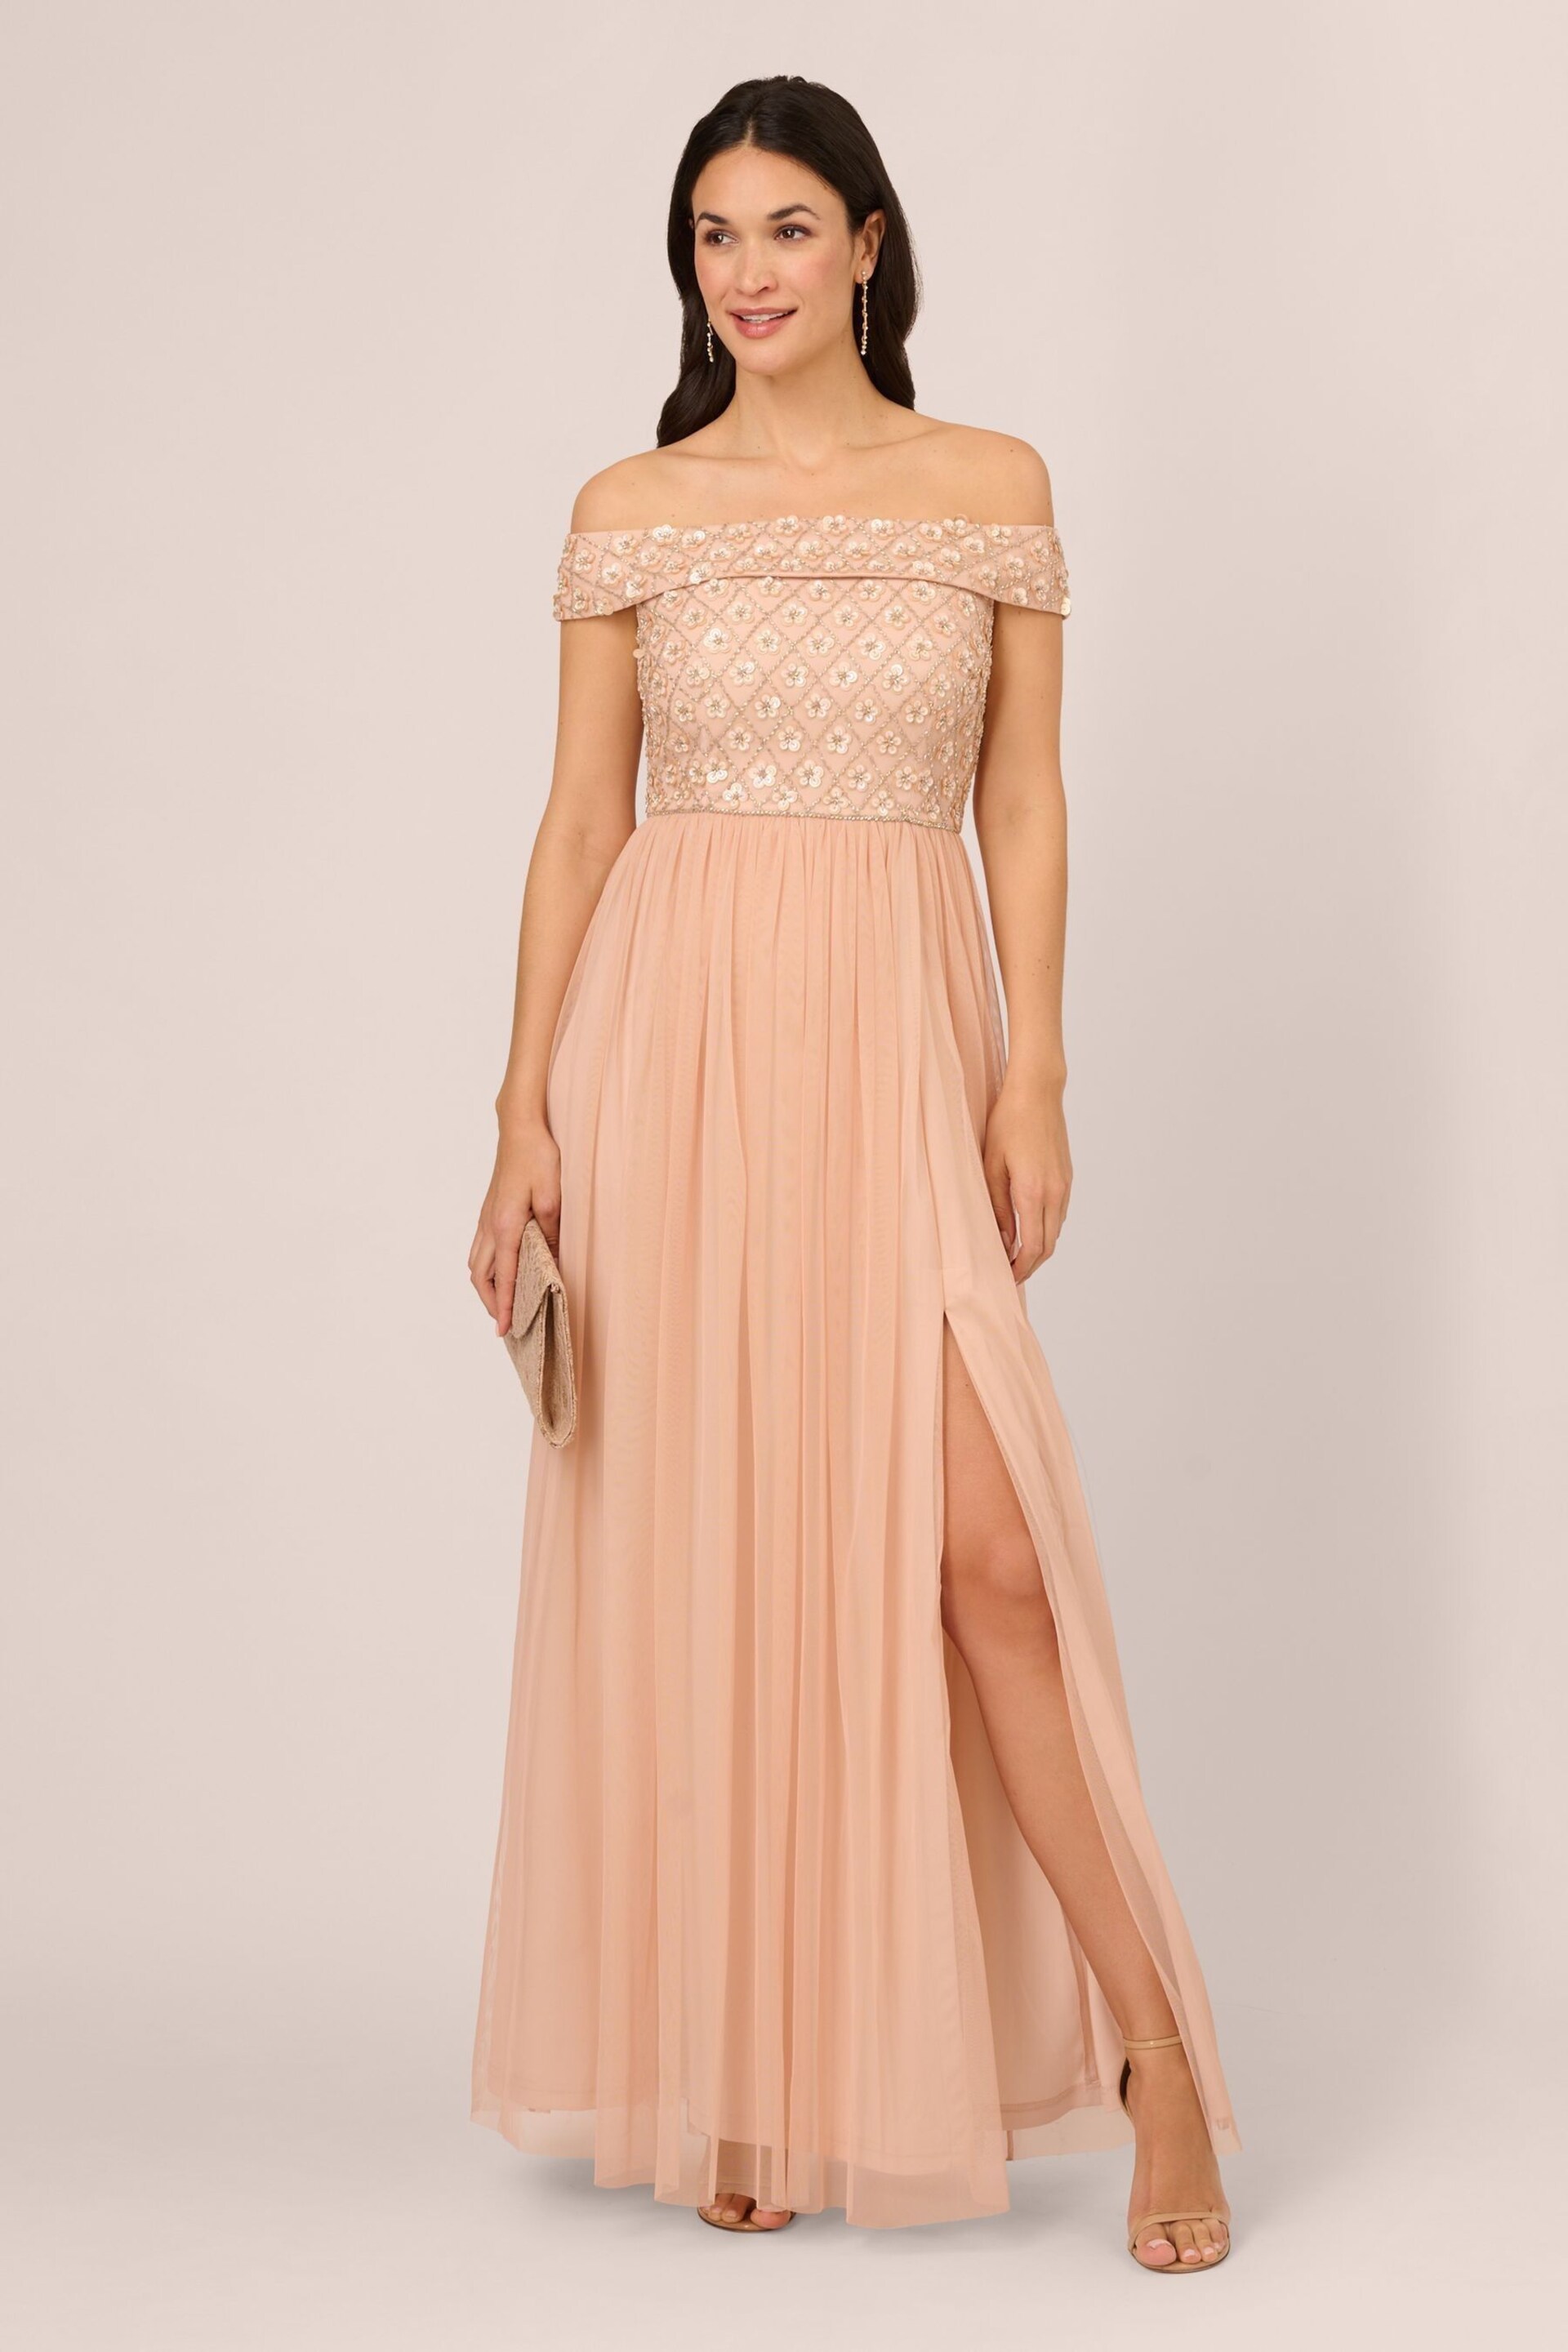 Adrianna Papell Pink Off Shoulder Bead Gown - Image 3 of 7